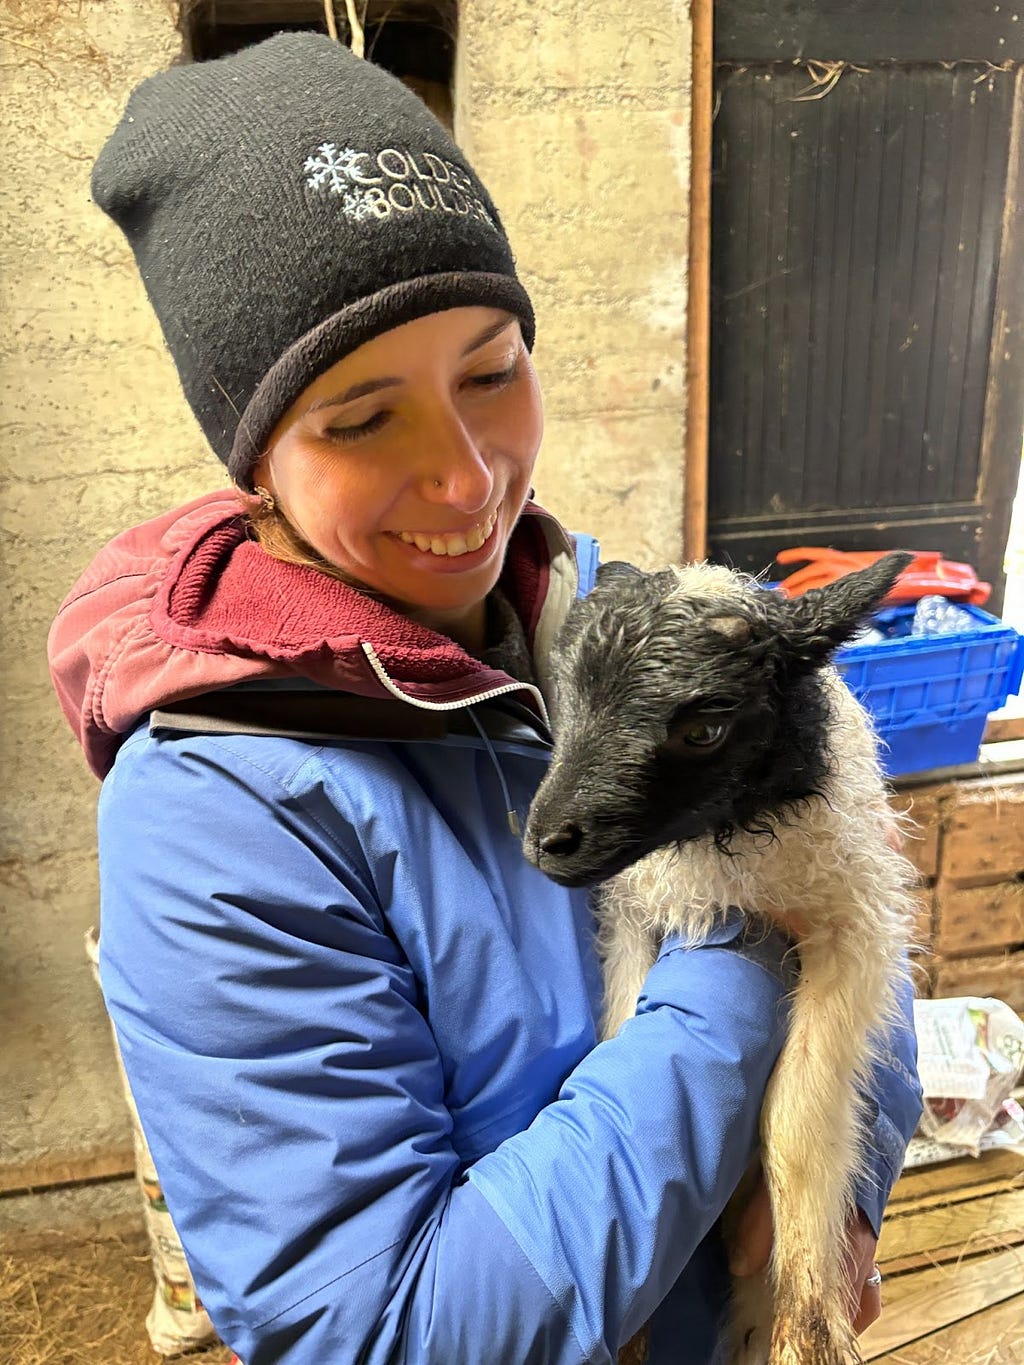 The author with a lamb who was born only a few hours previously. Photo credit: Forrest Collman